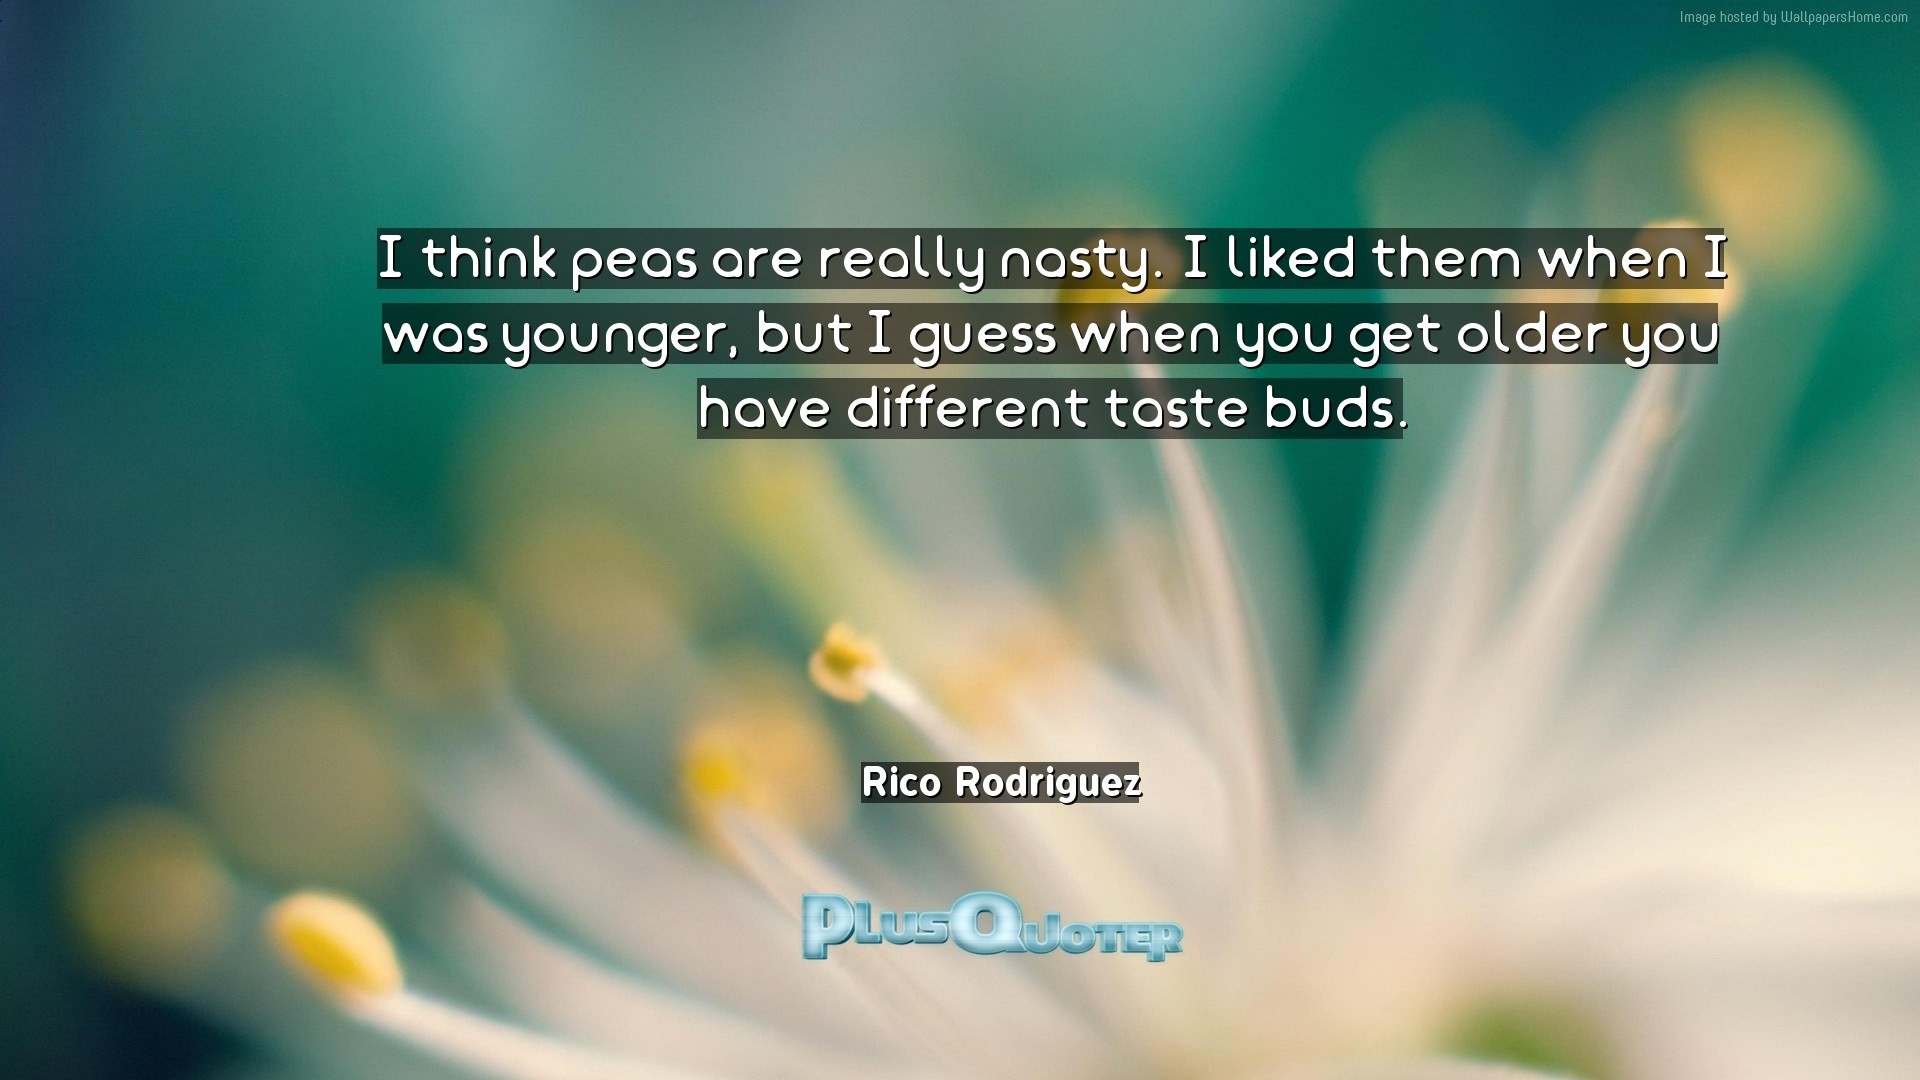 1920x1080 Download Wallpaper with inspirational Quotes- "I think peas are really nasty.  I liked